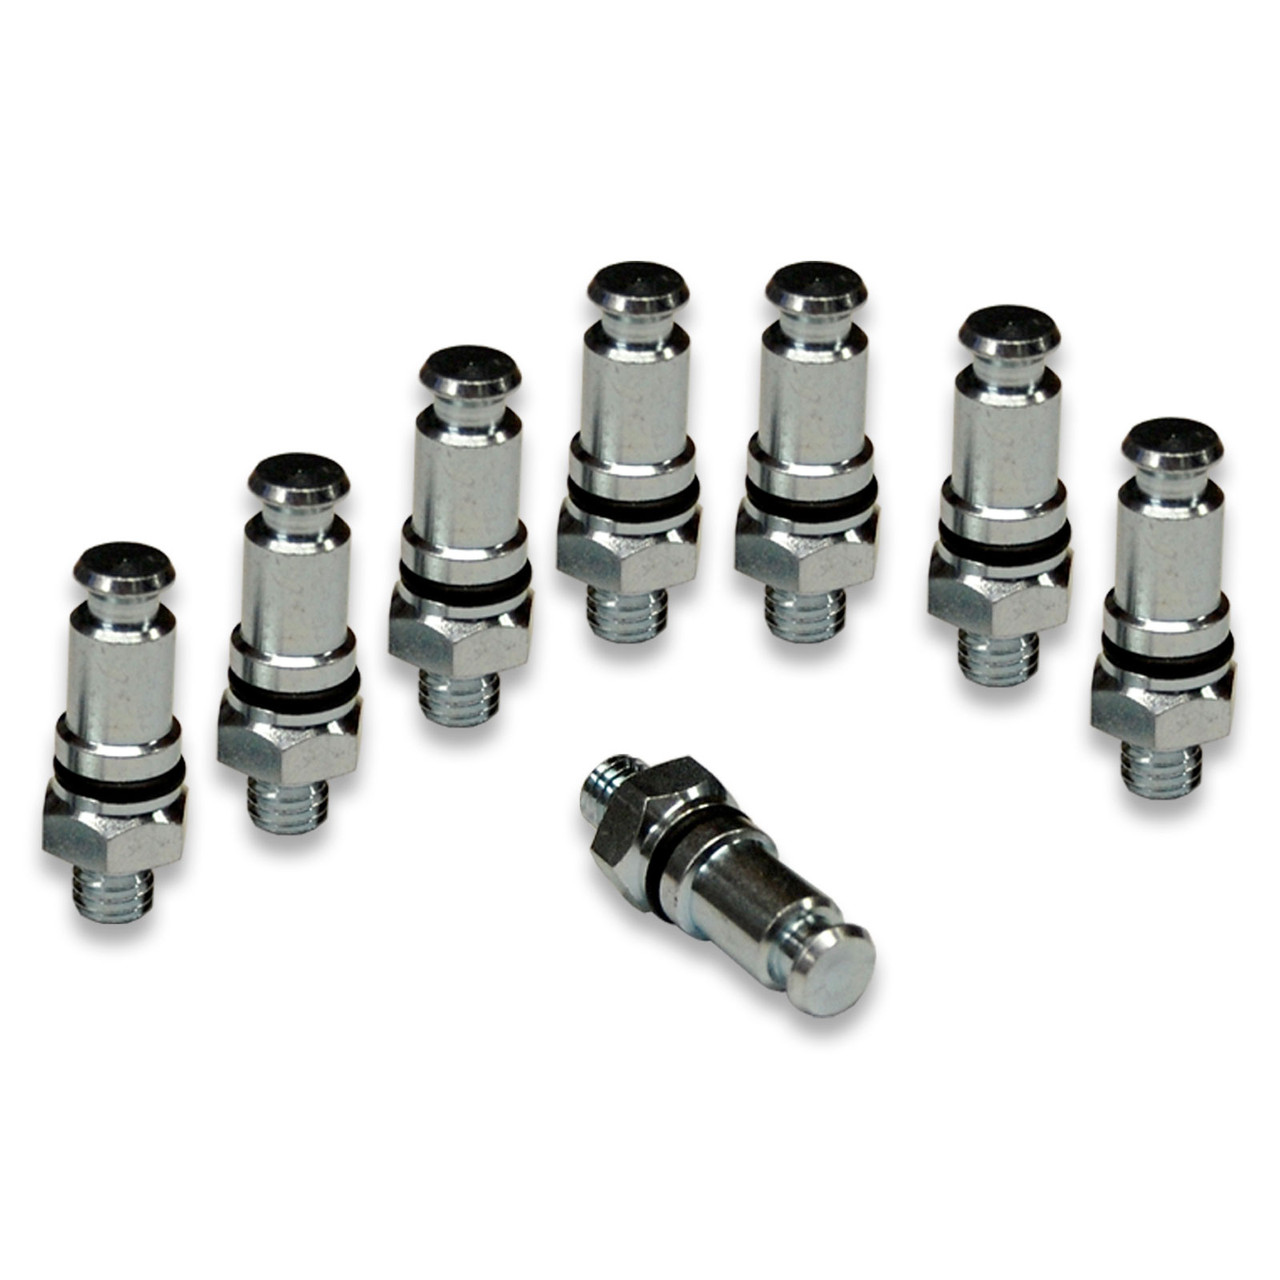 WC559 - Hunter Style Alignment Clamp Standard Screw-In Stud Feet Pack of 8 | McBay Performance